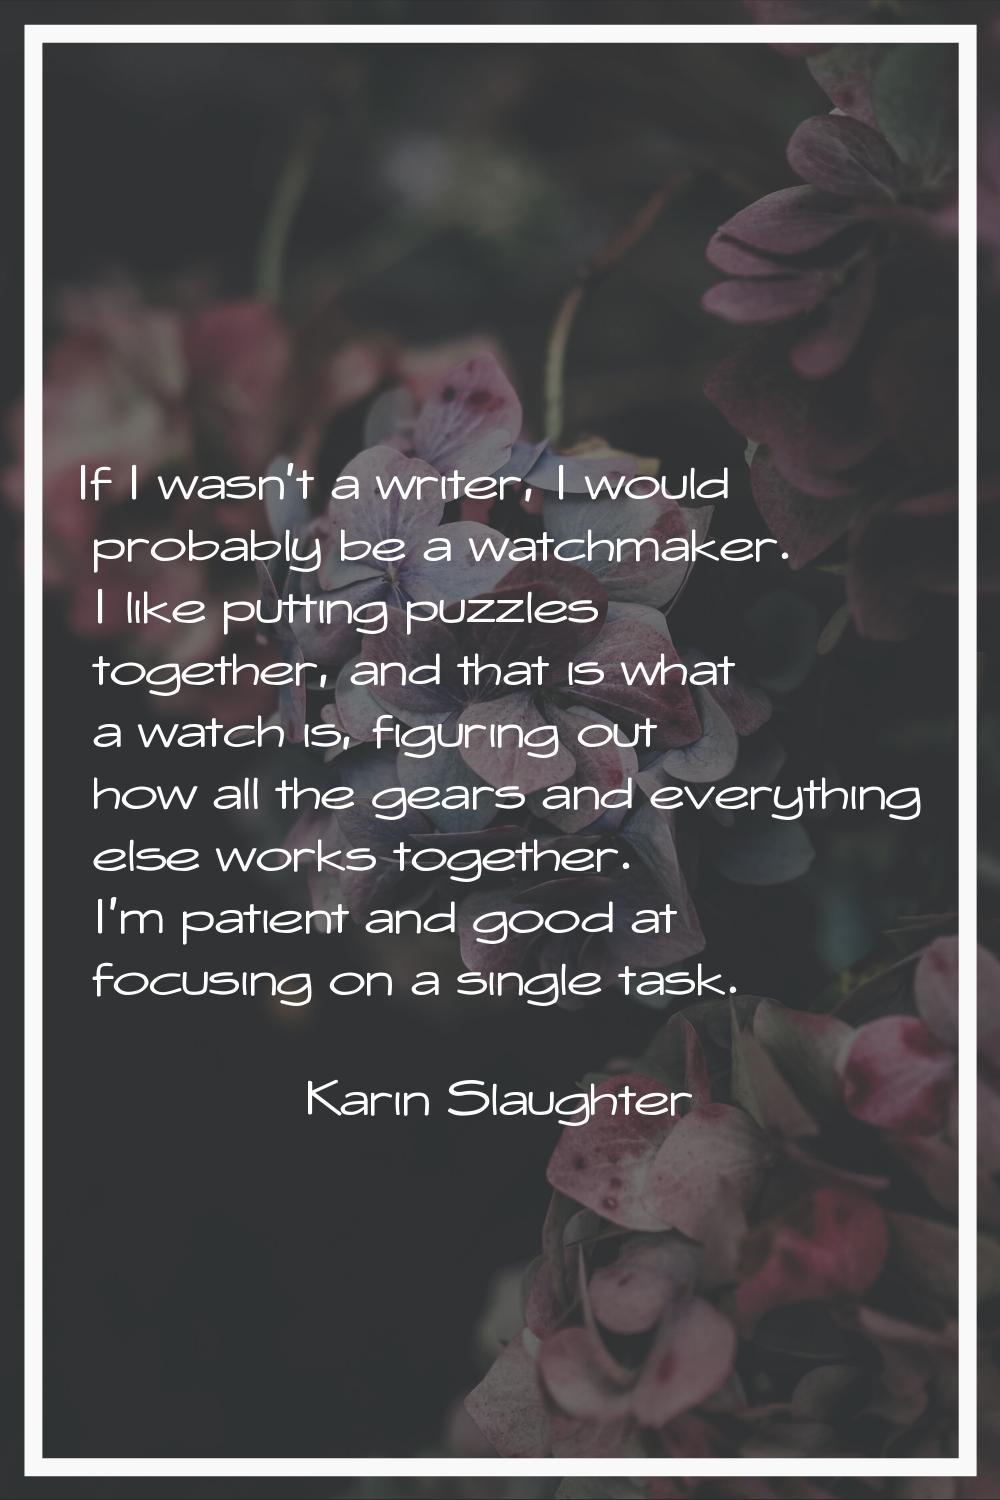 If I wasn't a writer, I would probably be a watchmaker. I like putting puzzles together, and that i